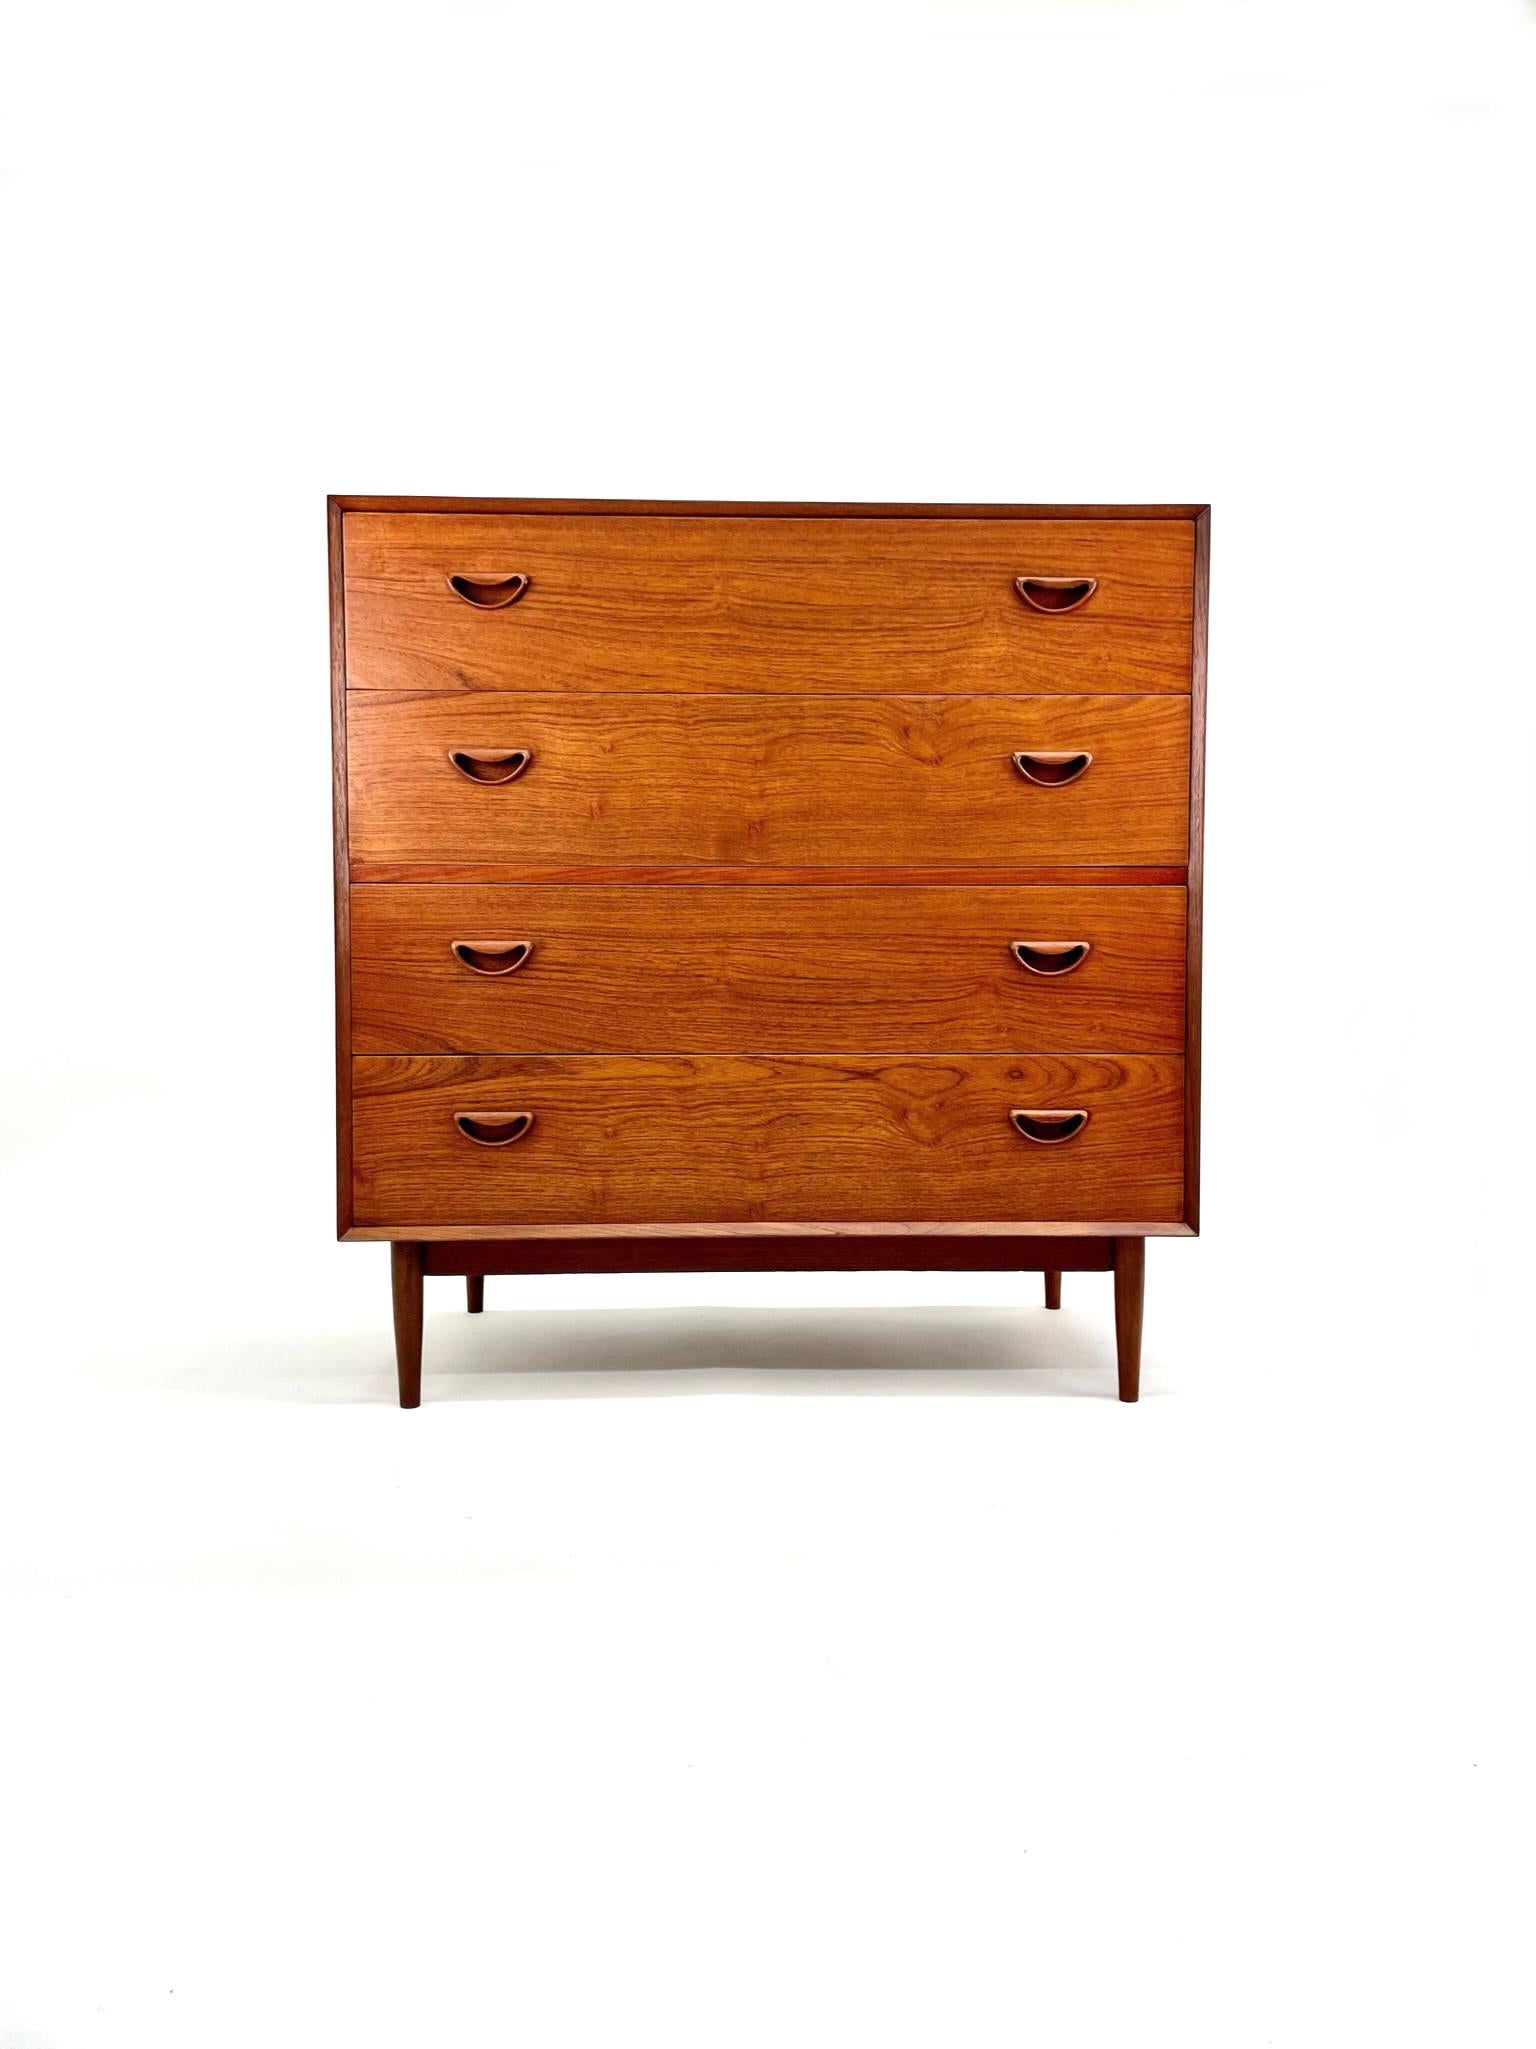 Solid Teak Vanity Dresser Chest designed by Peter Hvidt & Orla Mølgaard-Nielsen. It was produced in Denmark by Søborg Møbelfabrik during the 1950's.

This is a rare piece in that it is made of solid teak. The high-quality craftsmanship is notable in